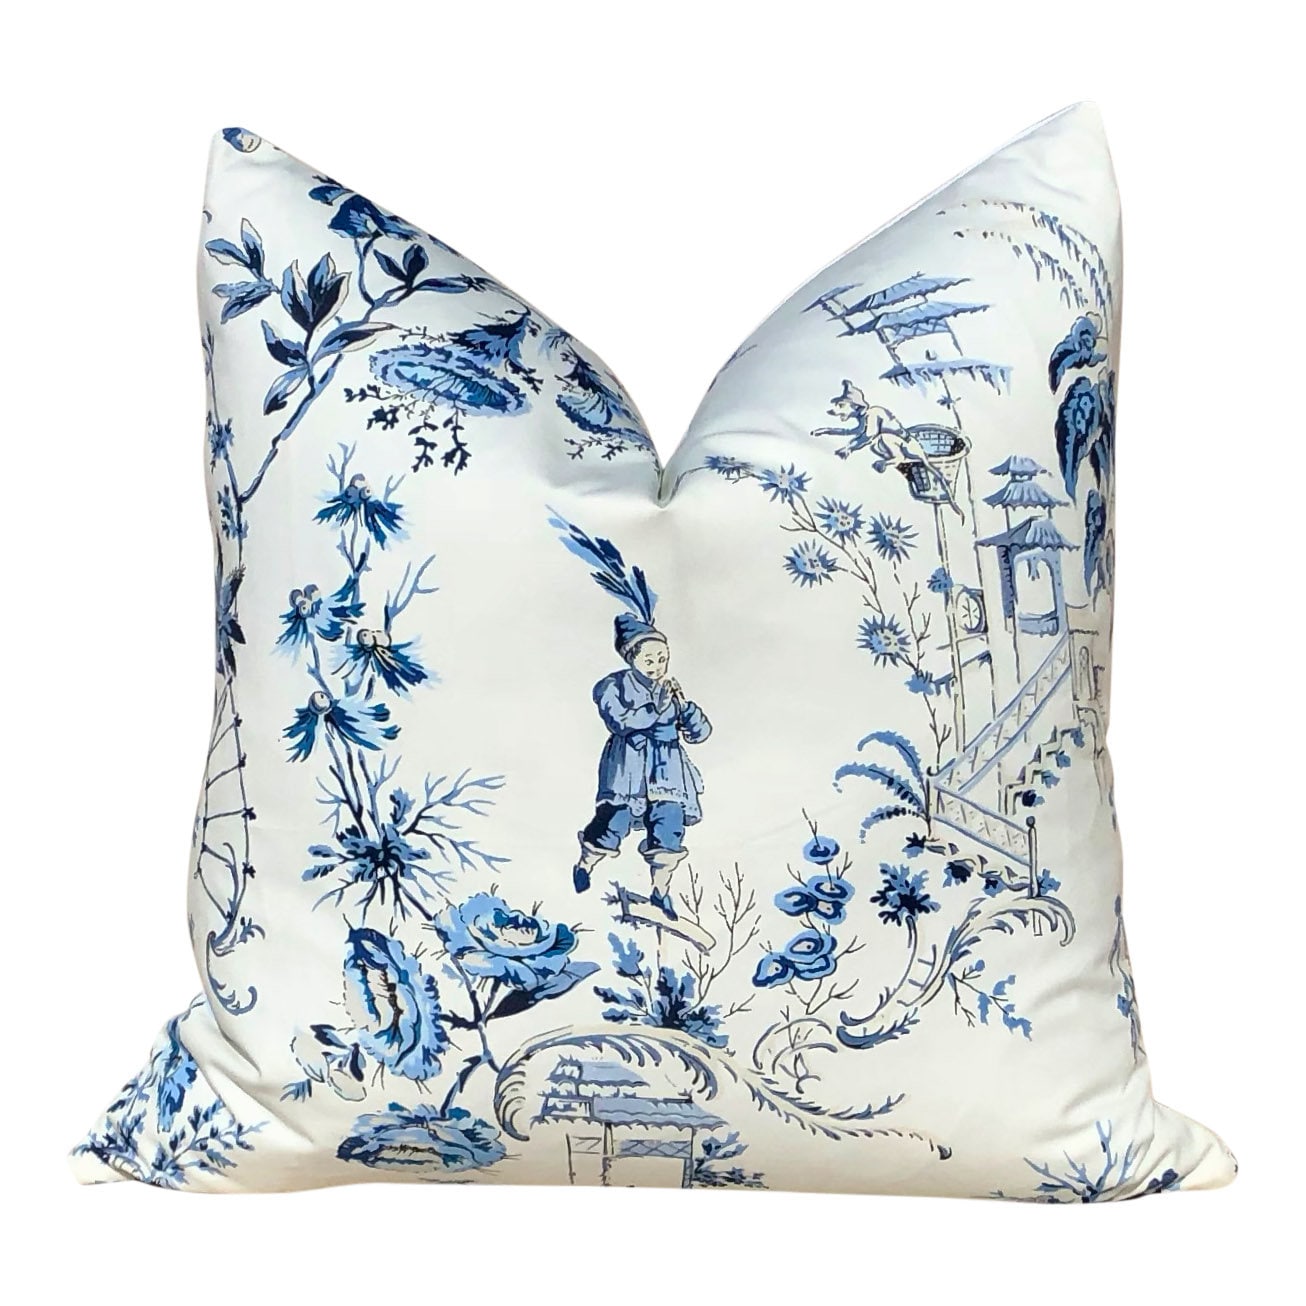 Nanjing Pillow in Porcelain. Chinoiserie Pillow Cover, Toile Blue Lumbar Pillow Case, Accent Asian Decor, Floral Blue and White Cushion